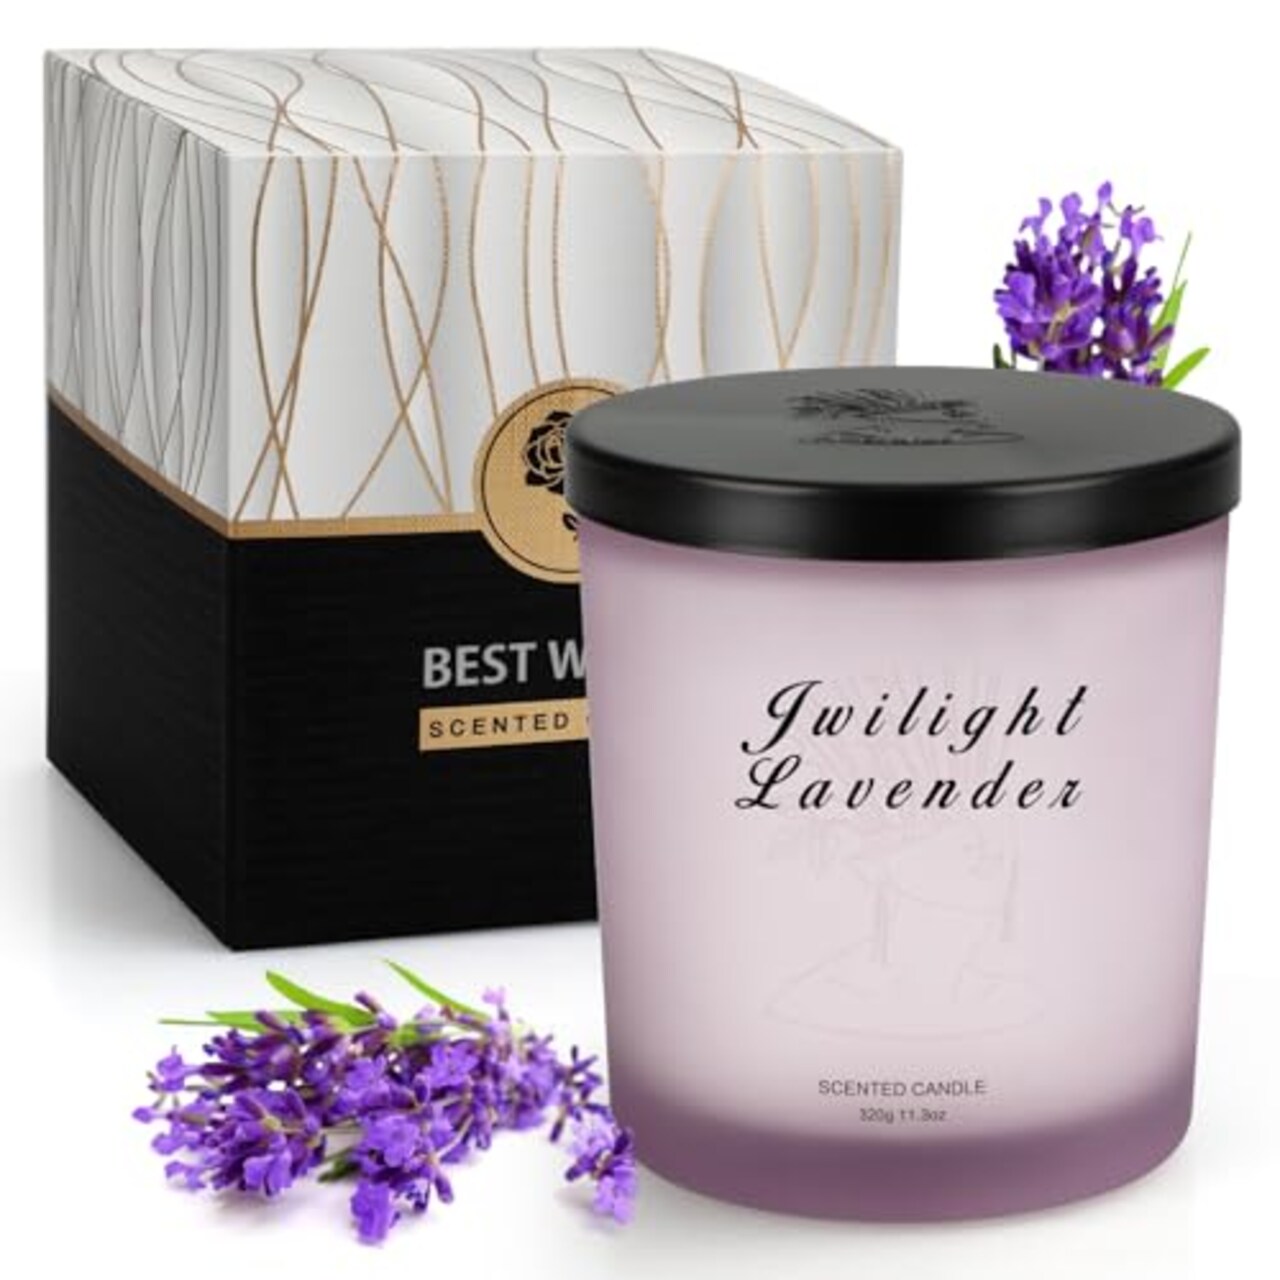 BXGRH Lavender Candles for Home, Candles for Home Scented, Candles Gifts  for Women, 11.3 oz Soy Candles, Up to 70 Hours Burn, Stress Relief Gifts  for Women, Birthday, Mother's Day, Christmas Gift